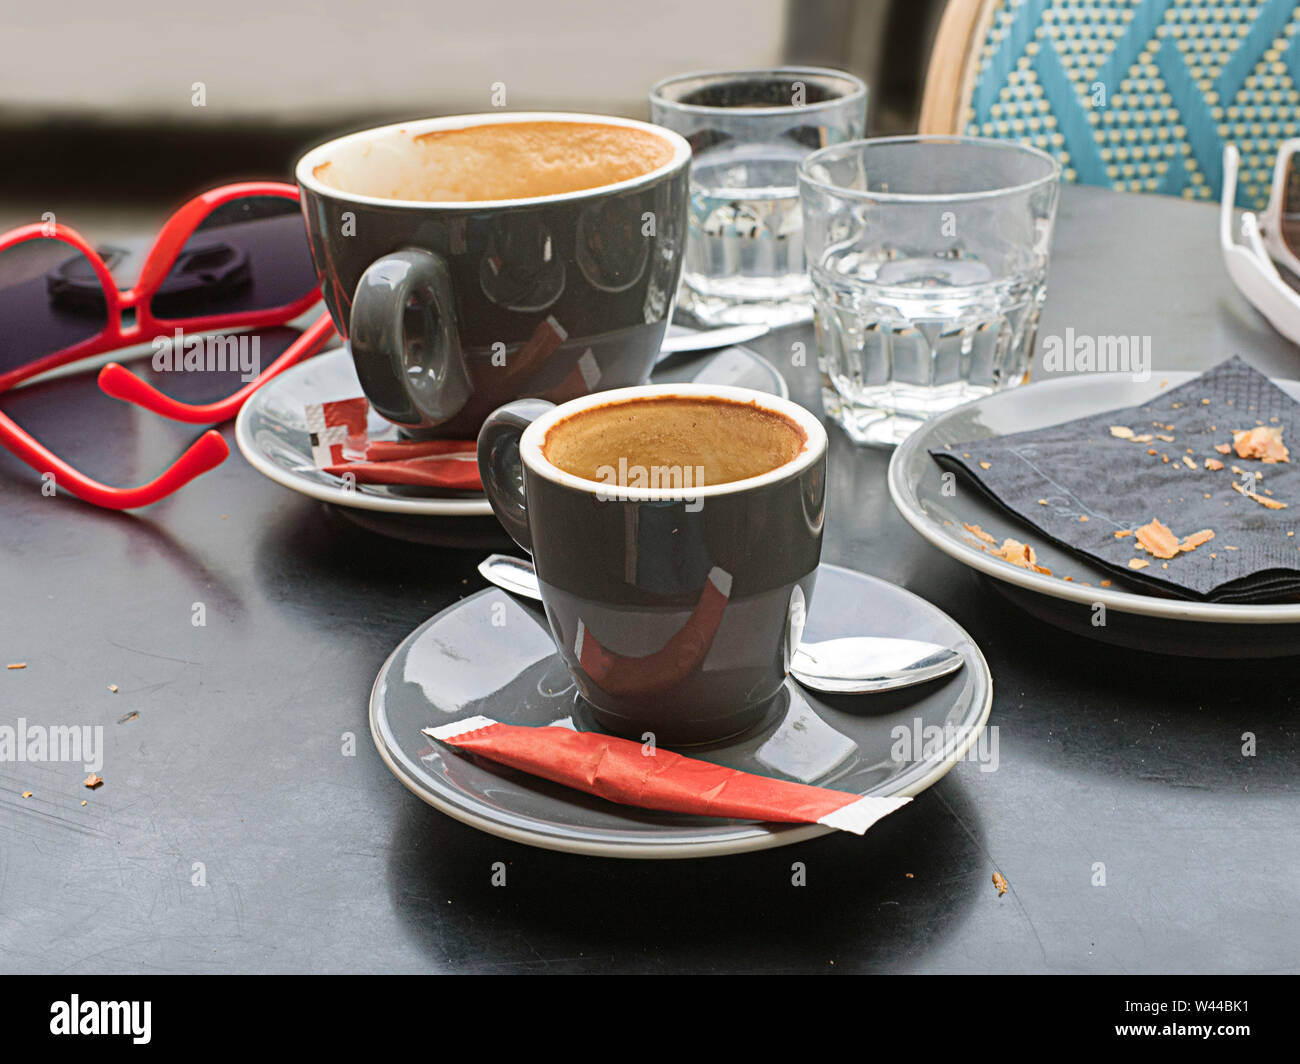 An outdoor cafe table after a couple's coffee break, showing two empty cups, a plate with the crumbs of a food item, and two pair of sunglasses, selec Stock Photo